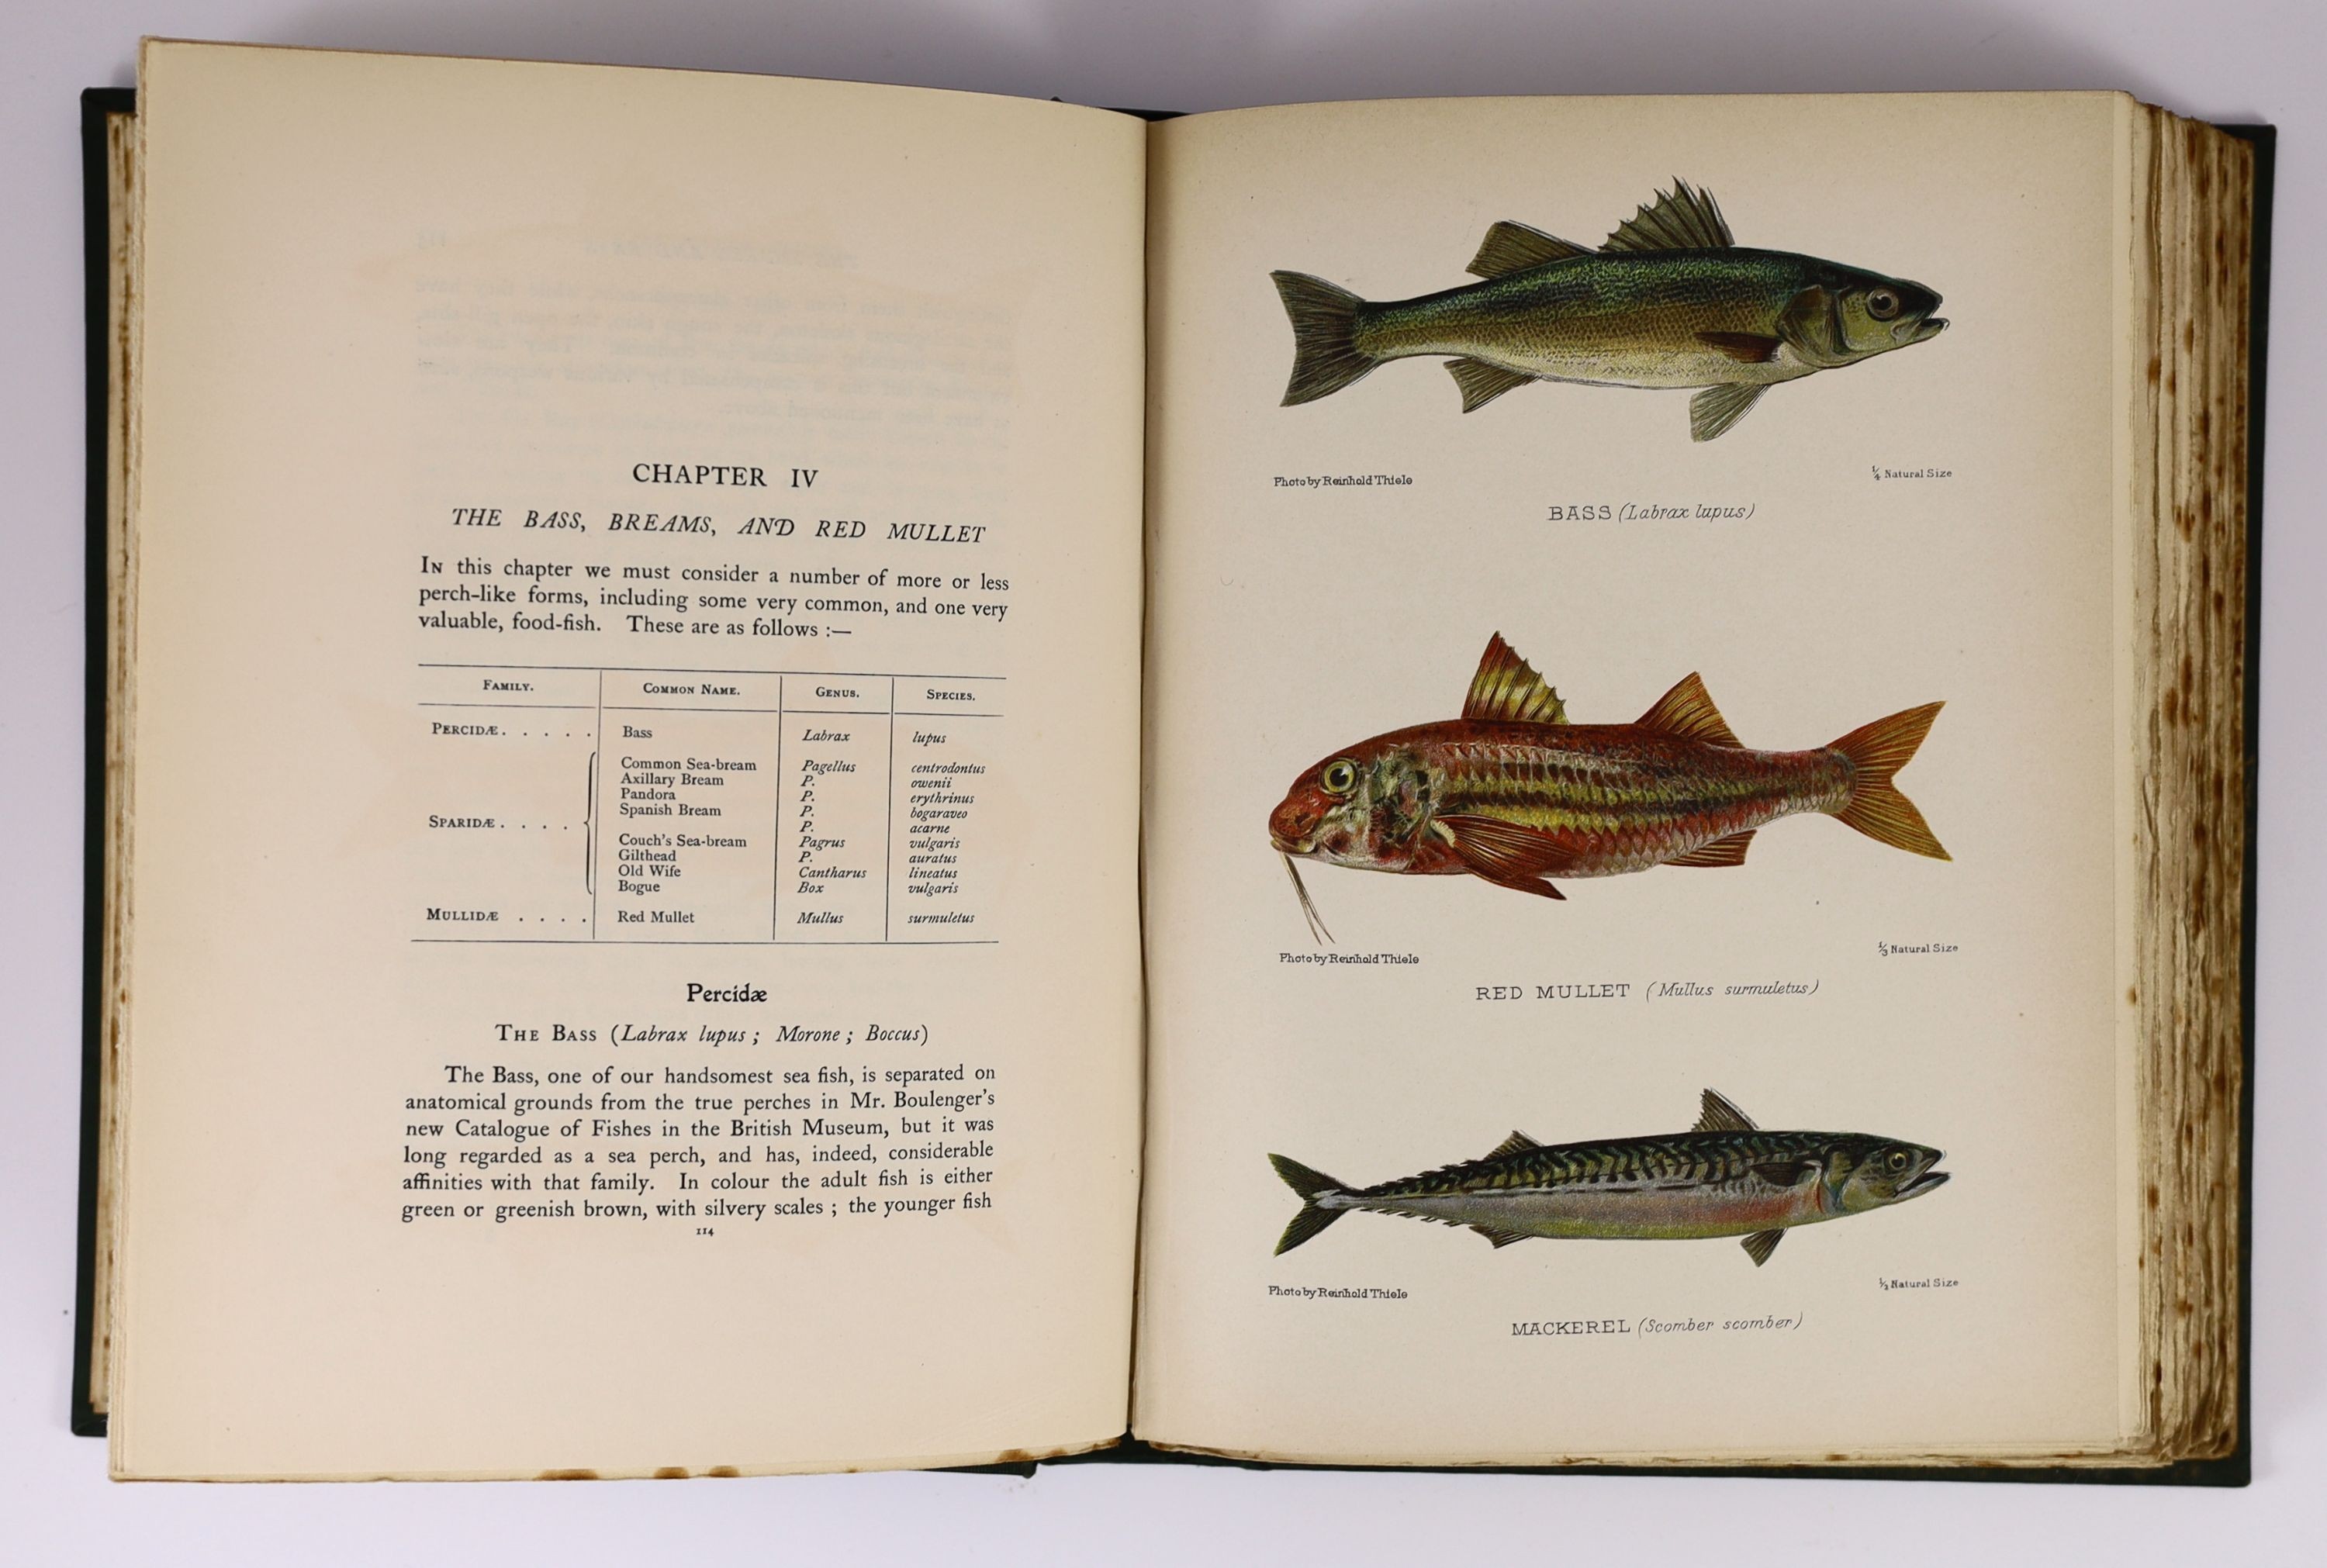 Maxwell, Herbert Eustace, Sir - British Fresh-Water Fish, 4to, original green cloth, with 12 coloured plates, foxed throughout, Hutchison & Co., London, 1904 and Aflalo, F.G. - British Salt-Water Fishes, 4to, original gr